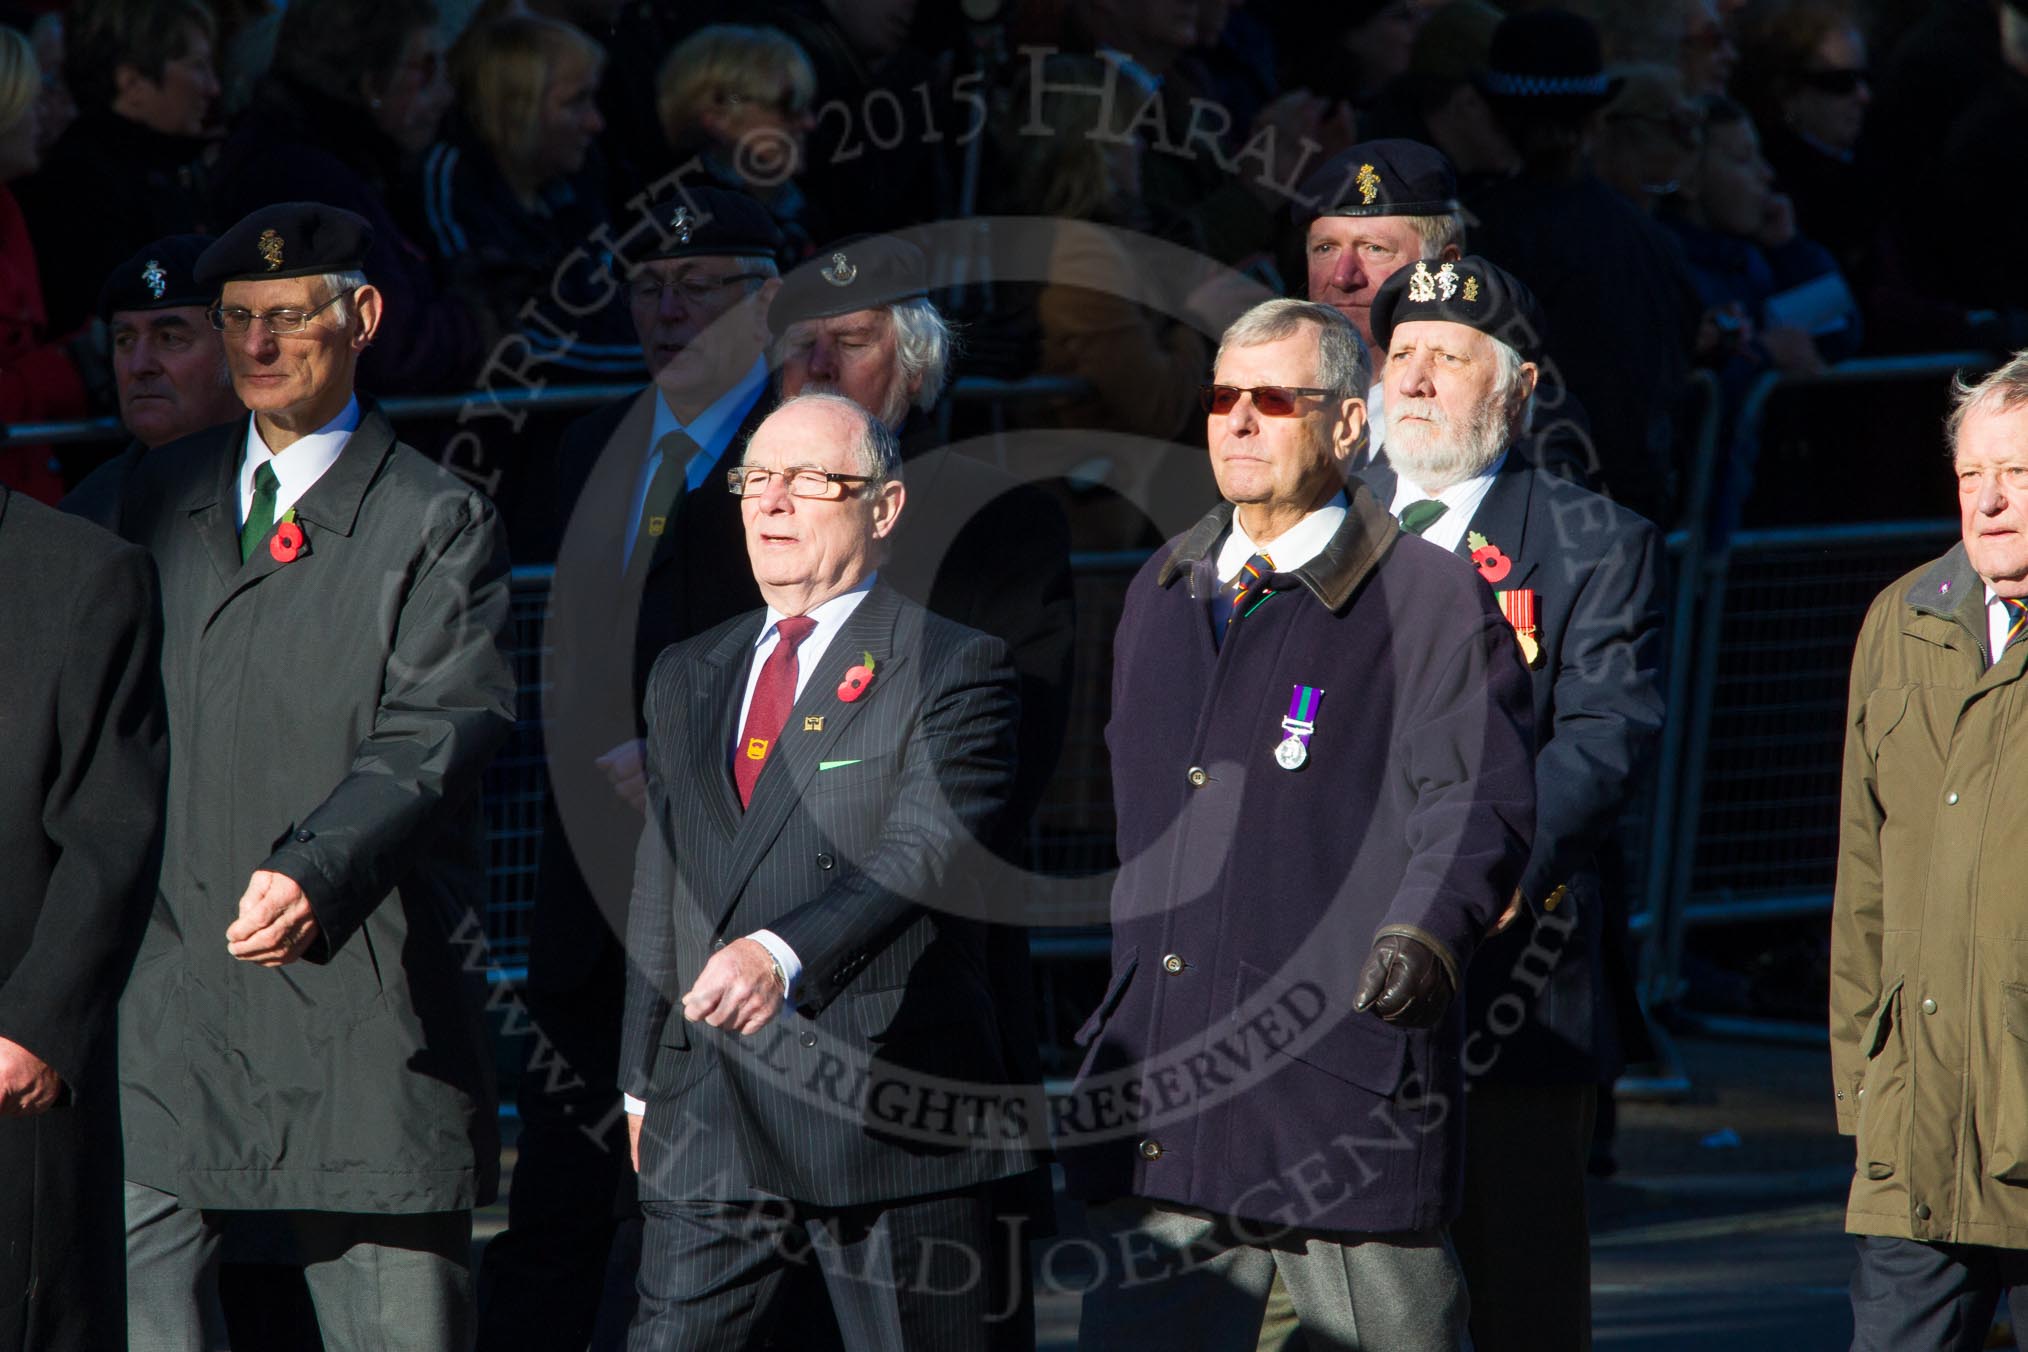 Remembrance Sunday Cenotaph March Past 2013: B13 - Beachley Old Boys Association..
Press stand opposite the Foreign Office building, Whitehall, London SW1,
London,
Greater London,
United Kingdom,
on 10 November 2013 at 12:01, image #1397